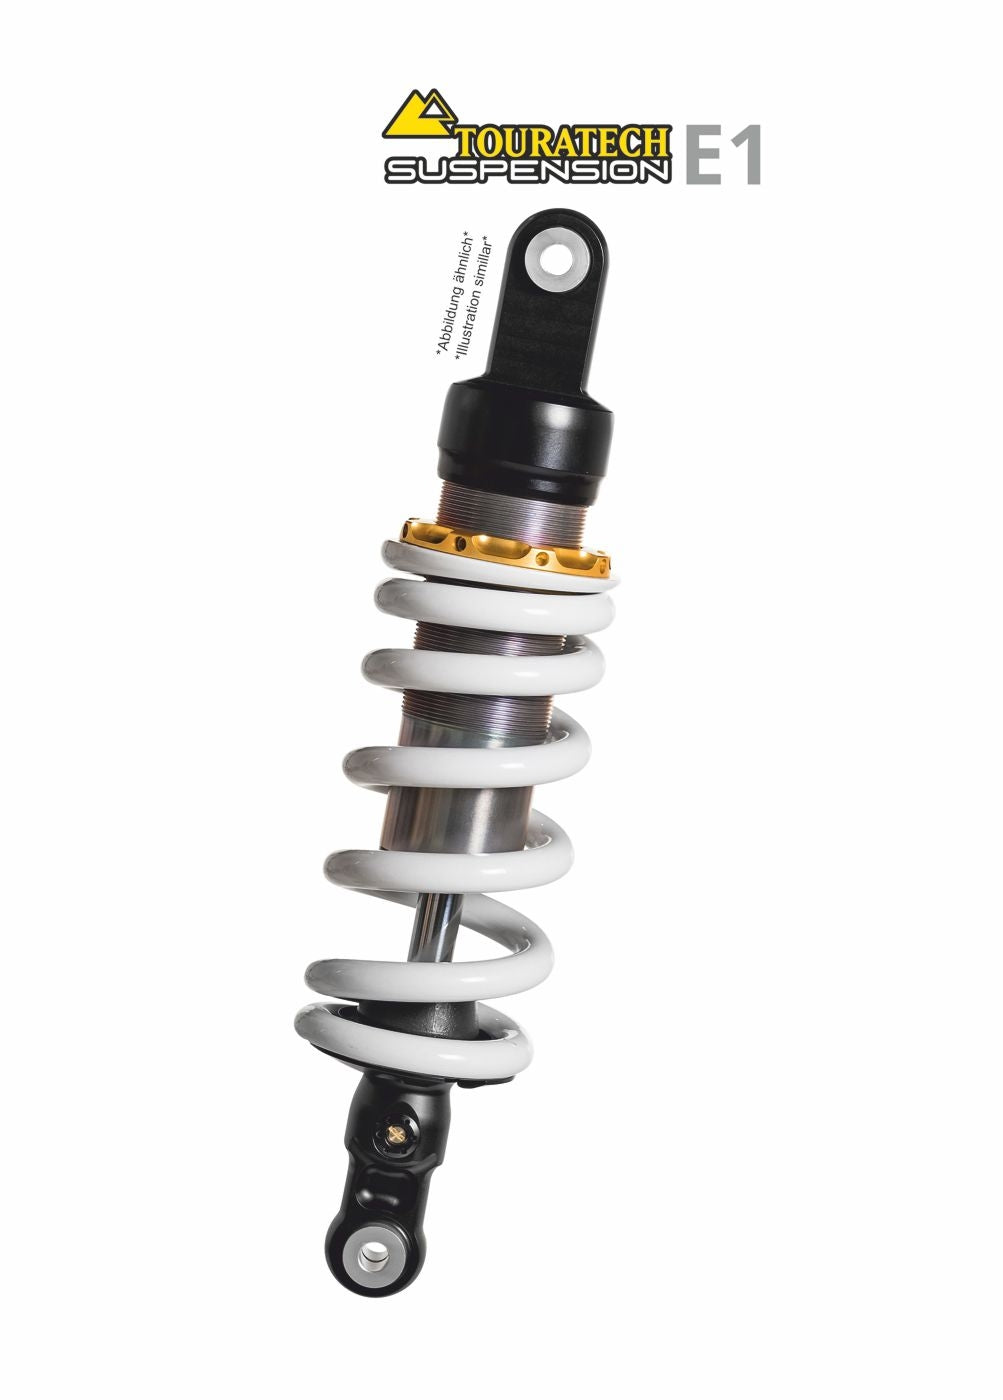 Touratech Suspension E1 shock absorber for Yamaha YZF 1000 R1 1998 - 2003